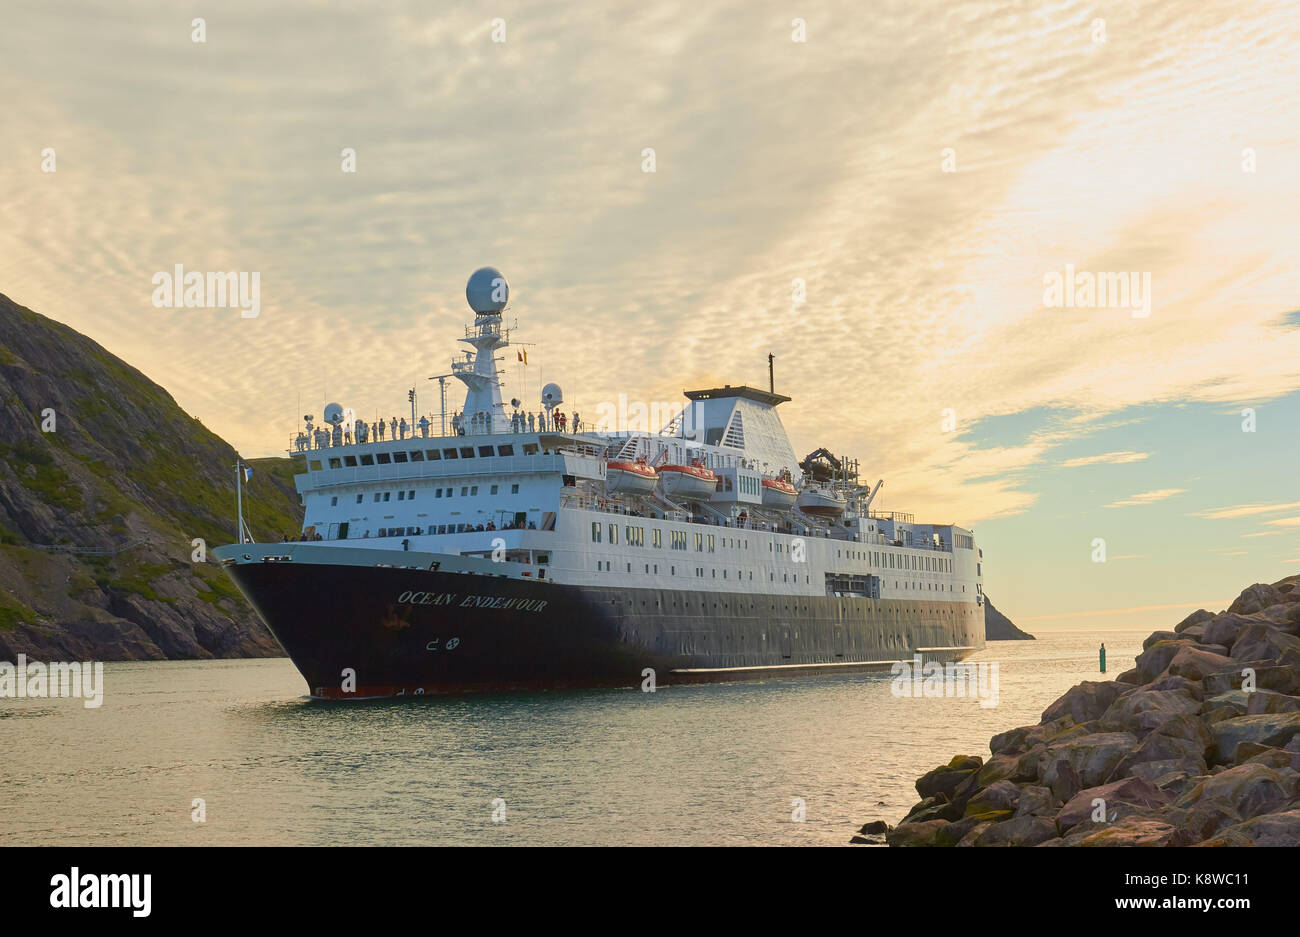 Ocean Endeavour cruise ship used for expedition cruising in remote environments arriving in St John's, Newfoundland, Canada Stock Photo